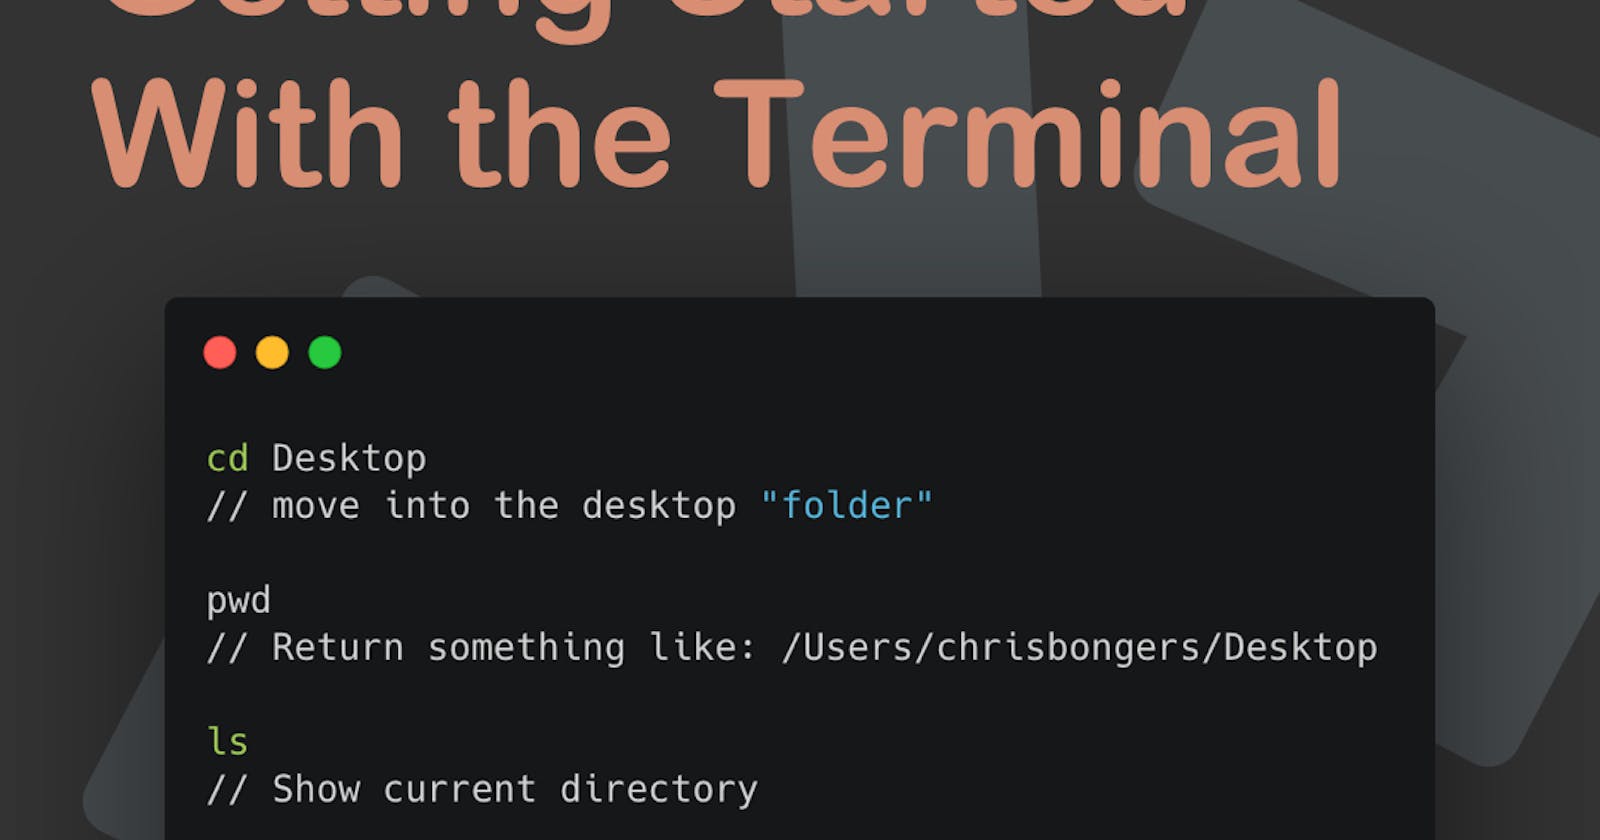 Getting Started With the Terminal